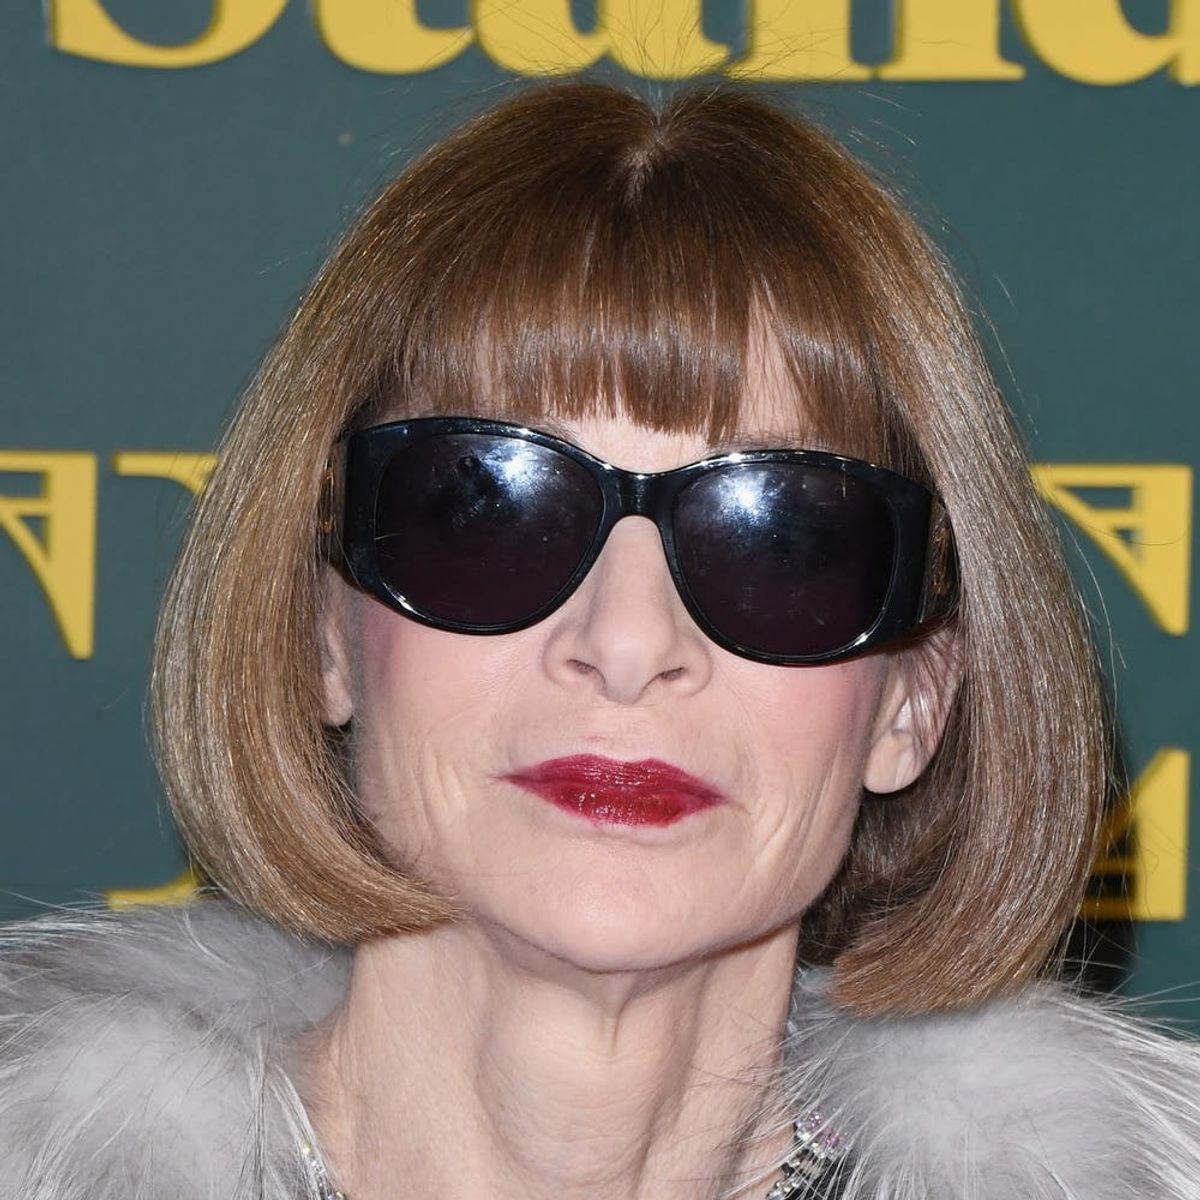 Anna Wintour Says Condé Nast Is Making Some MAJOR Changes Following Allegations of Sexual Misconduct Against Photographers